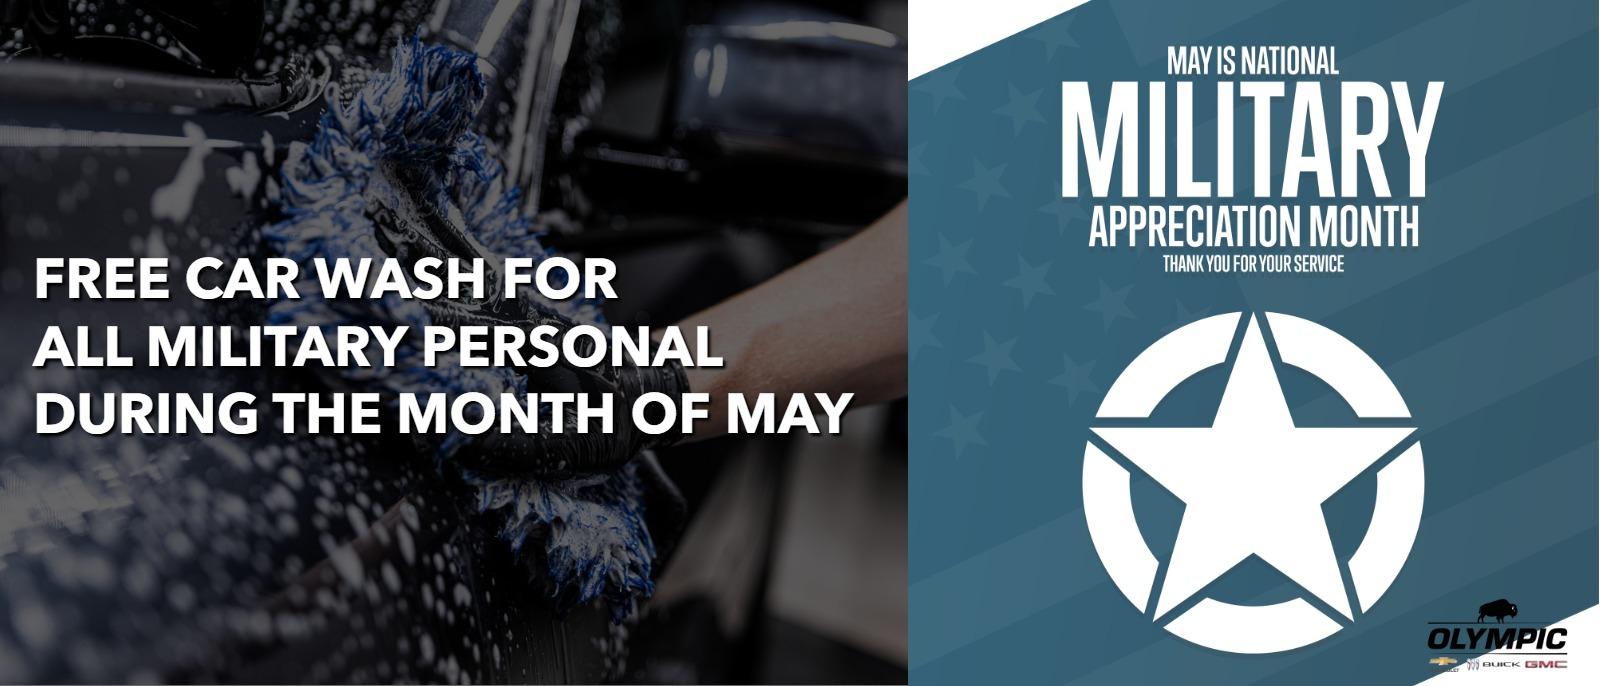 Free Car Wash for all Military Personal during the month of May